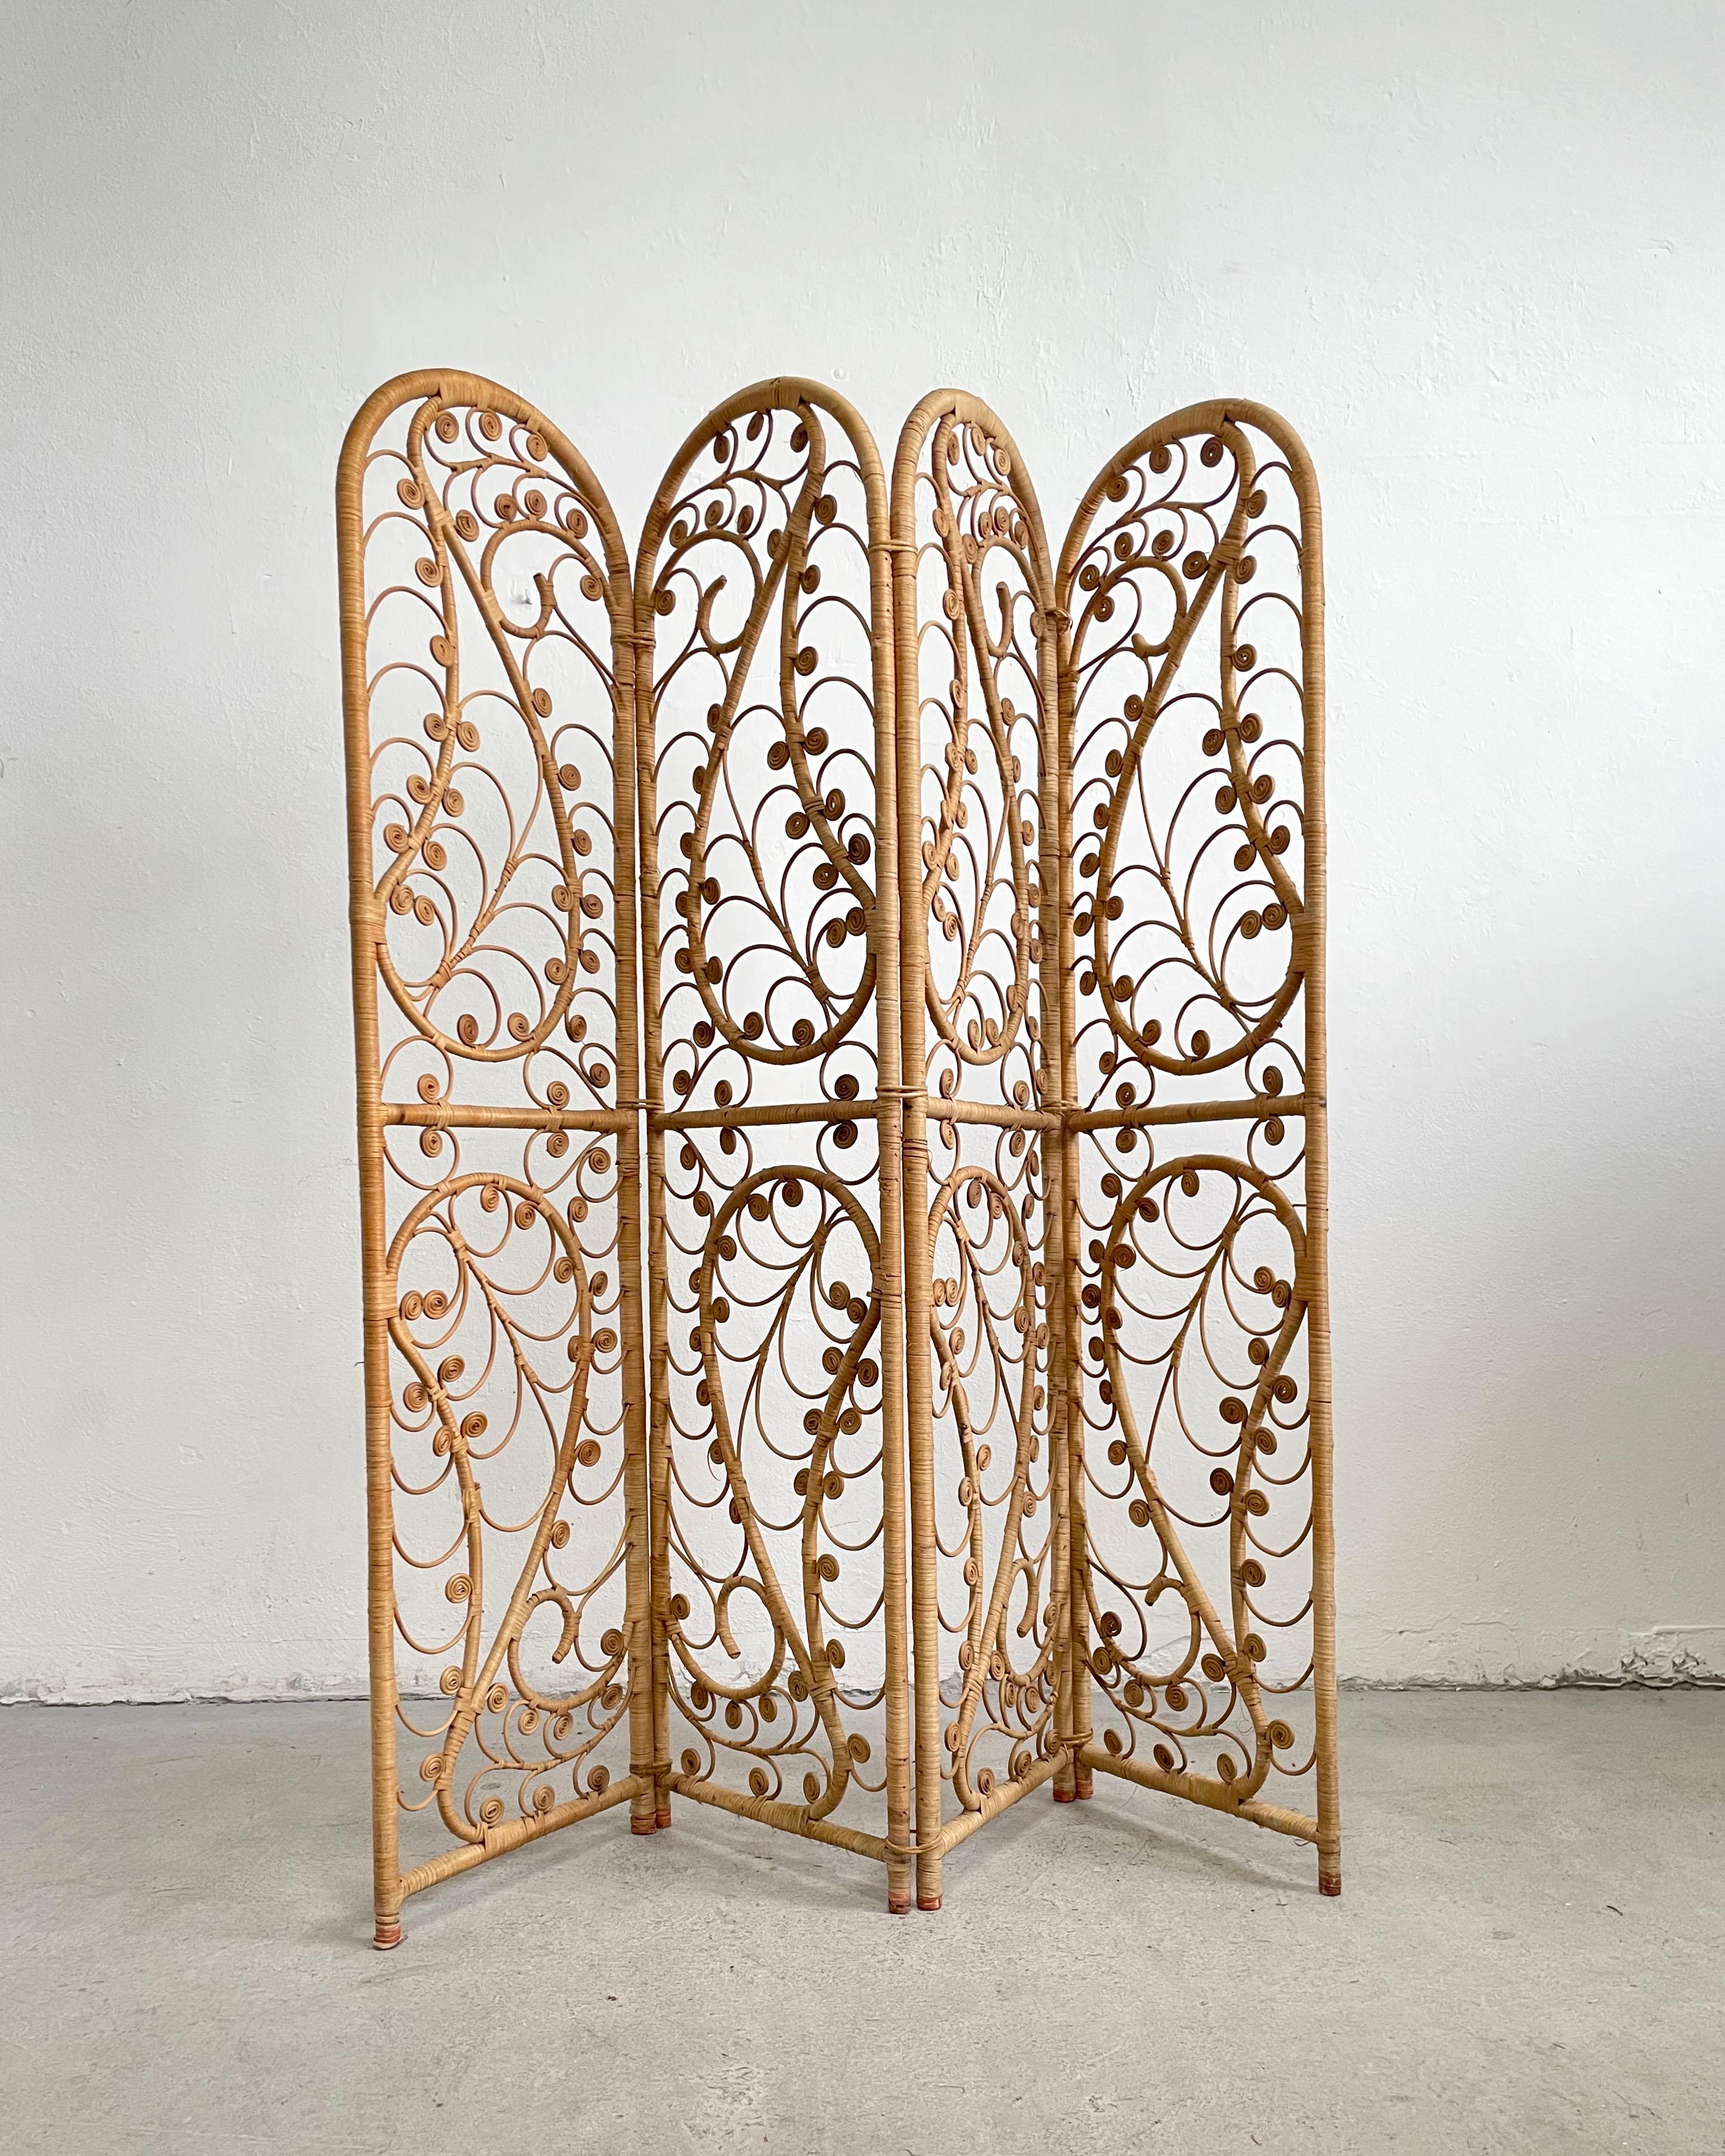 Stunning 4-panel screen room divider made of Ratan manufactured in the period between 1920's and 1940's in India

The screen is in very good condition with some small traces of cosmetic wear and beautiful patina